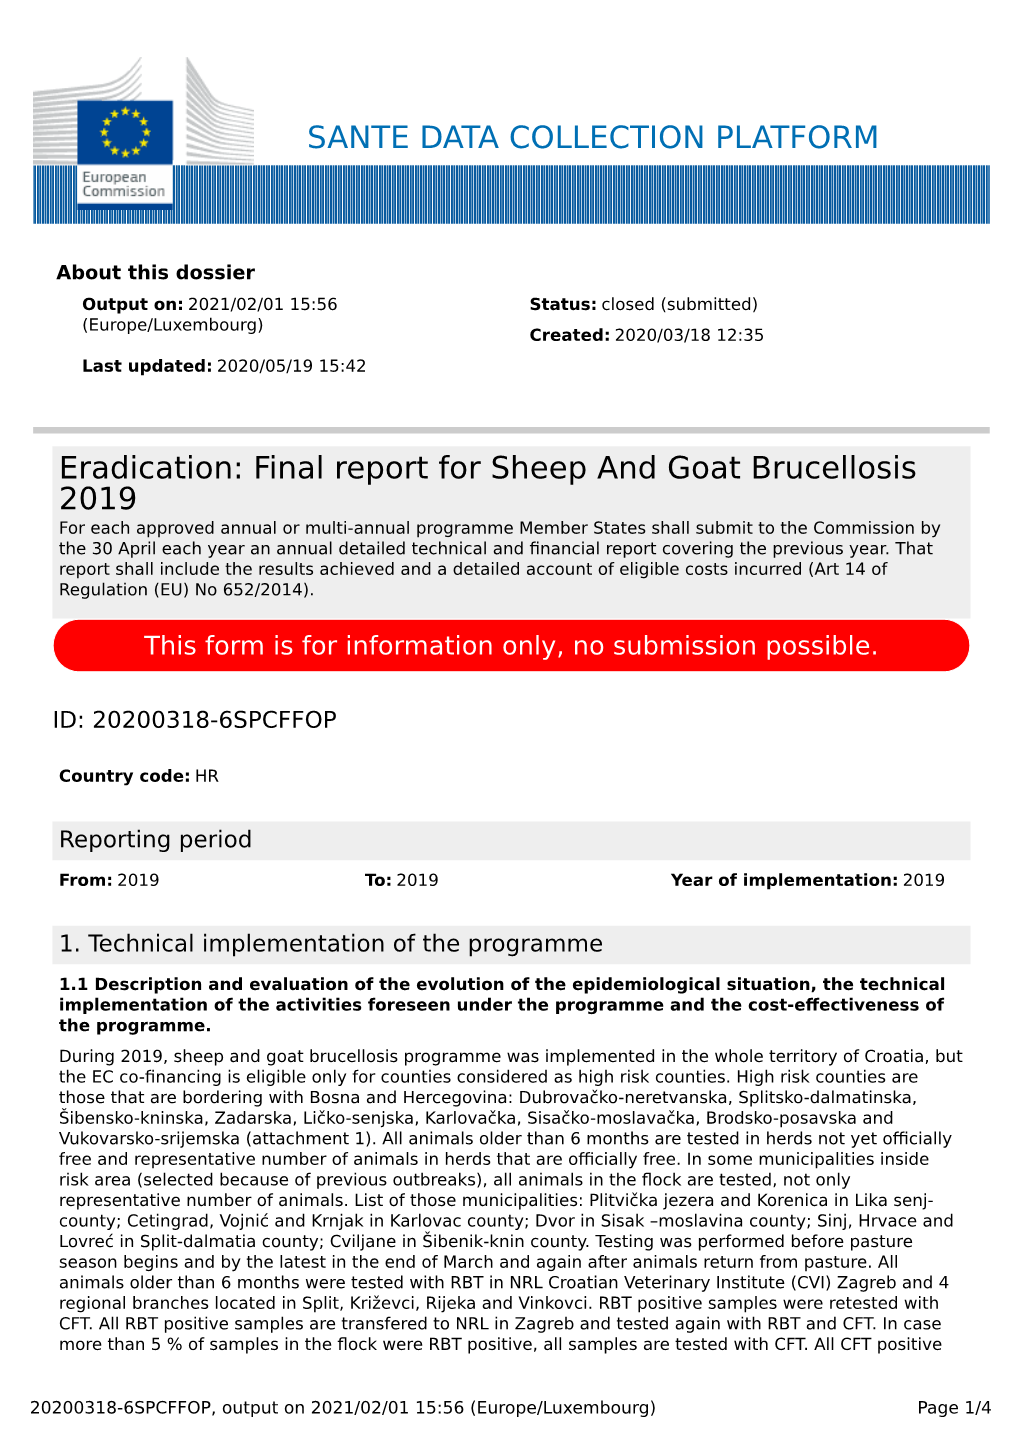 Final Report for Sheep and Goat Brucellosis 2019